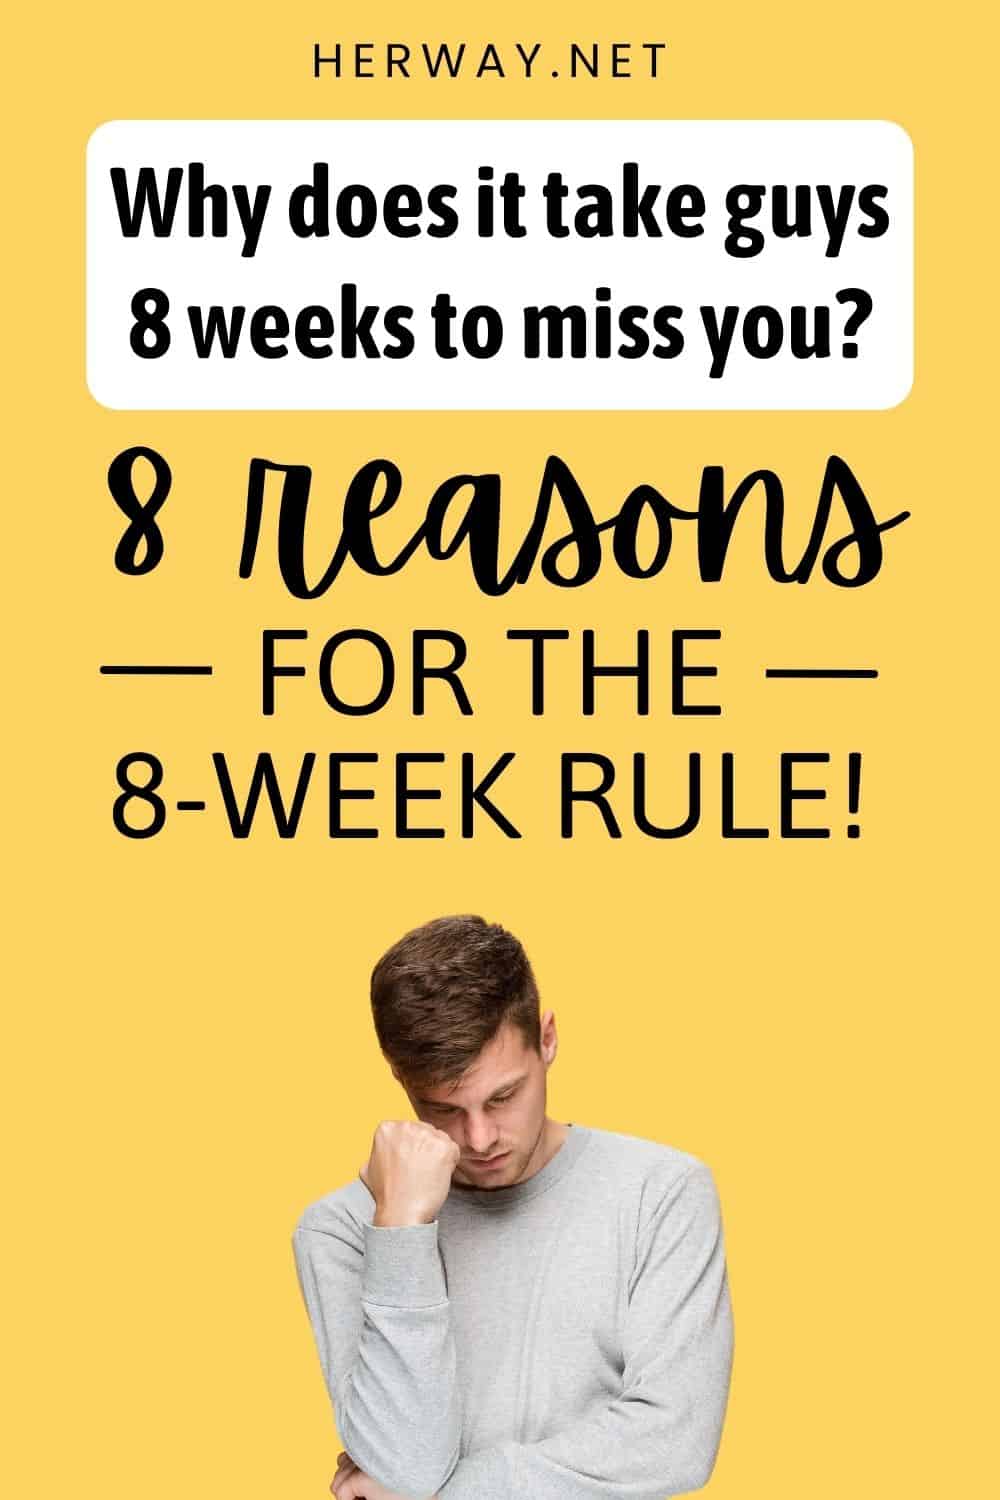 Why Does It Take Guys 8 Weeks To Miss You (8 Reasons) Pinterest